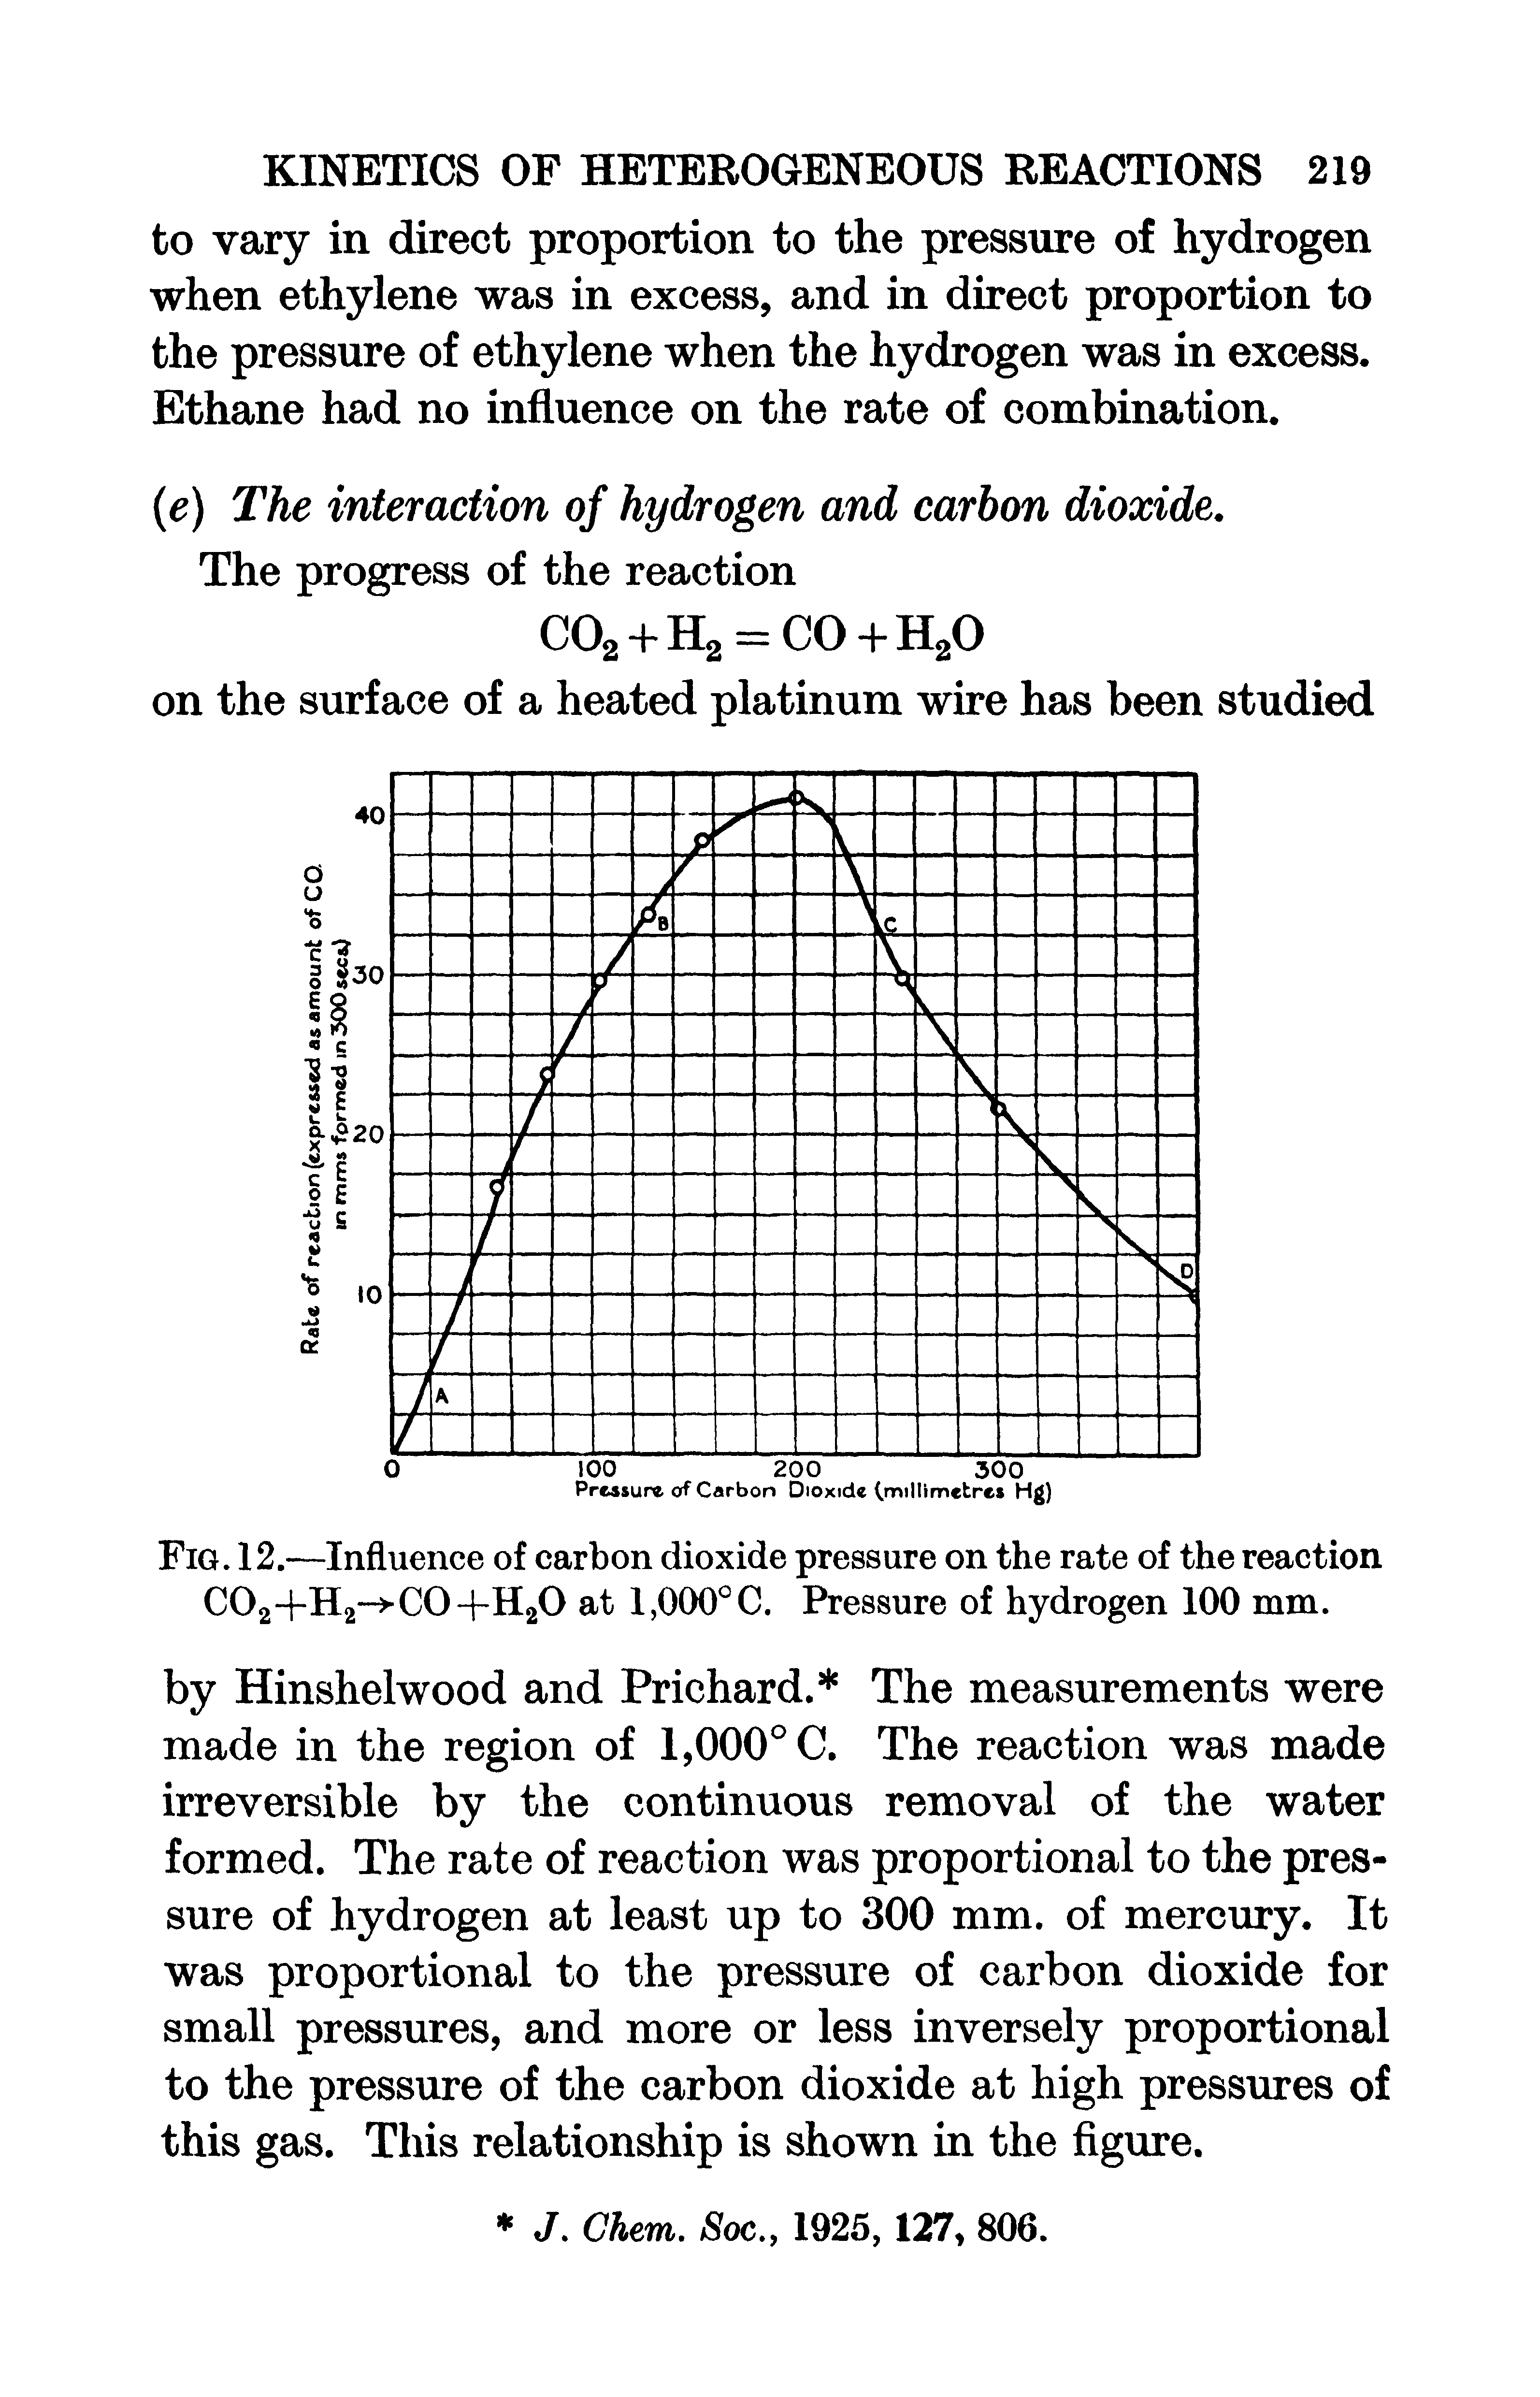 Fig. 12.—Influence of carbon dioxide pressure on the rate of the reaction C02+H2- C0+H20 at 1,000°C. Pressure of hydrogen 100 mm.